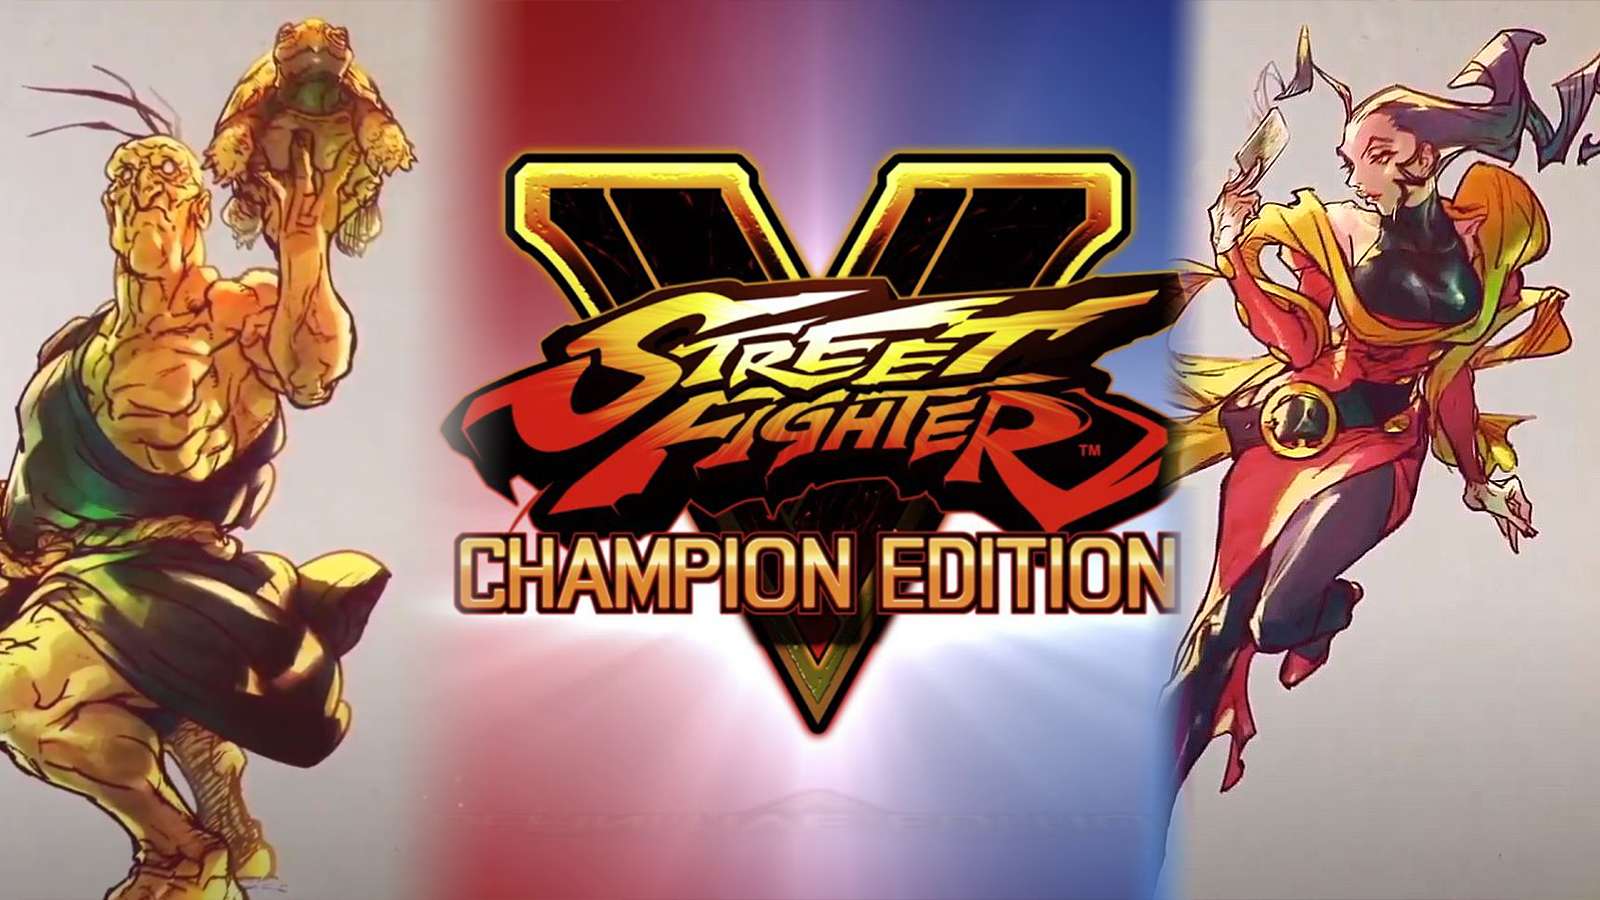 Street Fighter V: Champion Edition logo surrounded by Oro's SFV art and Rose's SFV art.